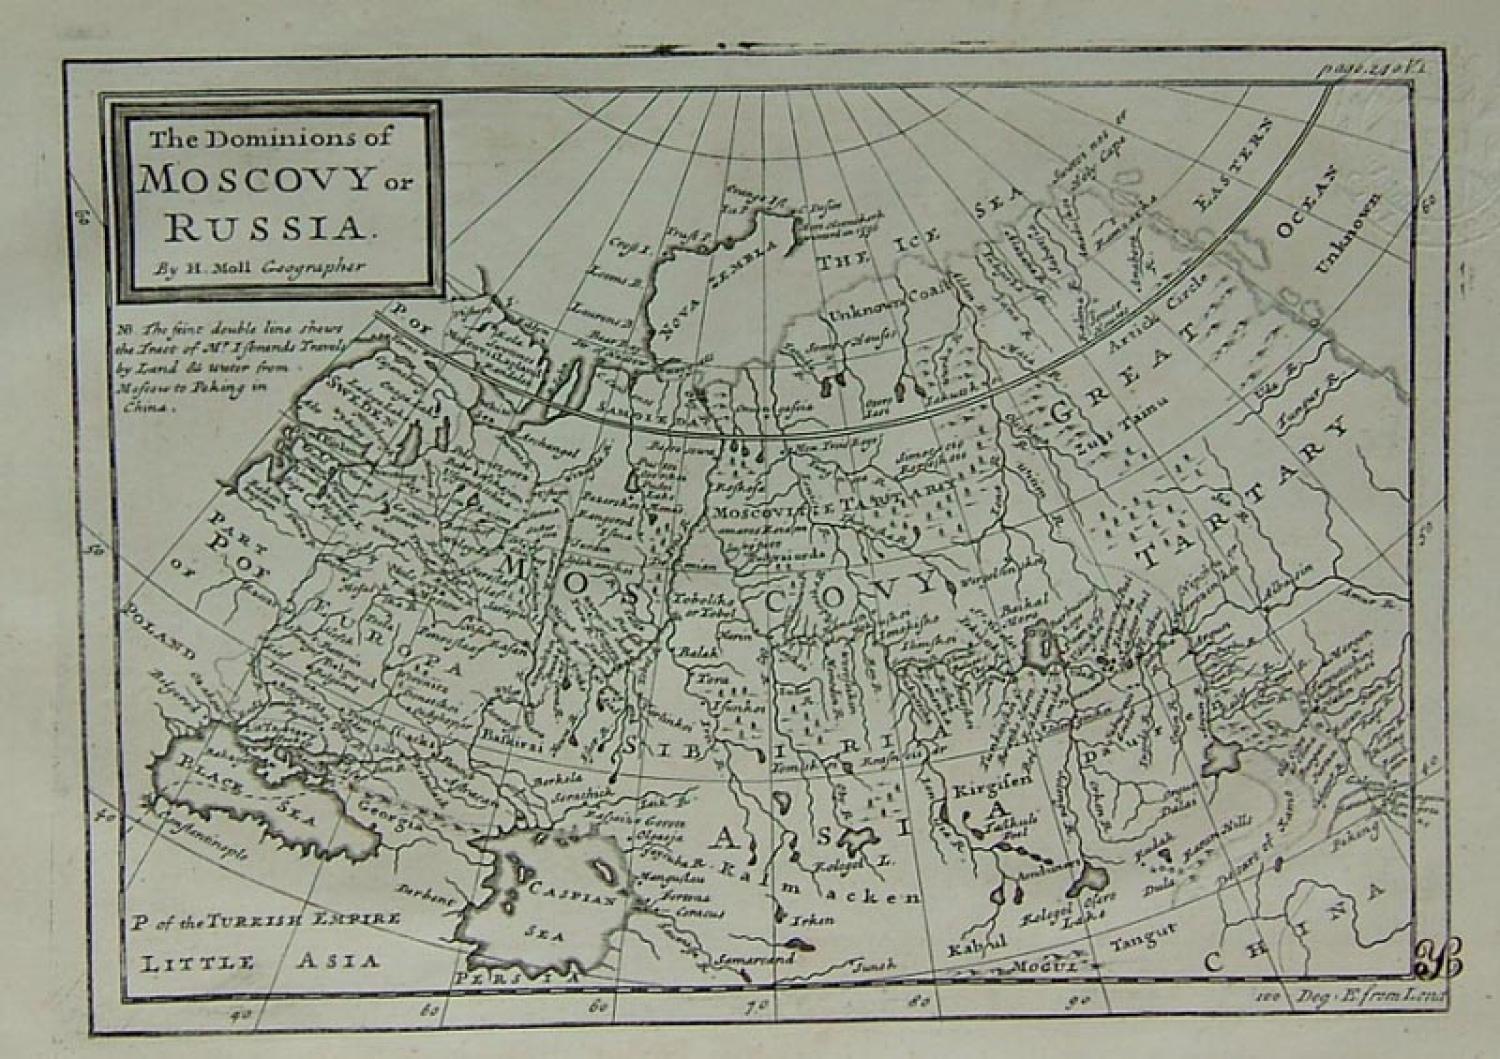 Moll - The Dominions of Moscovy or Russia